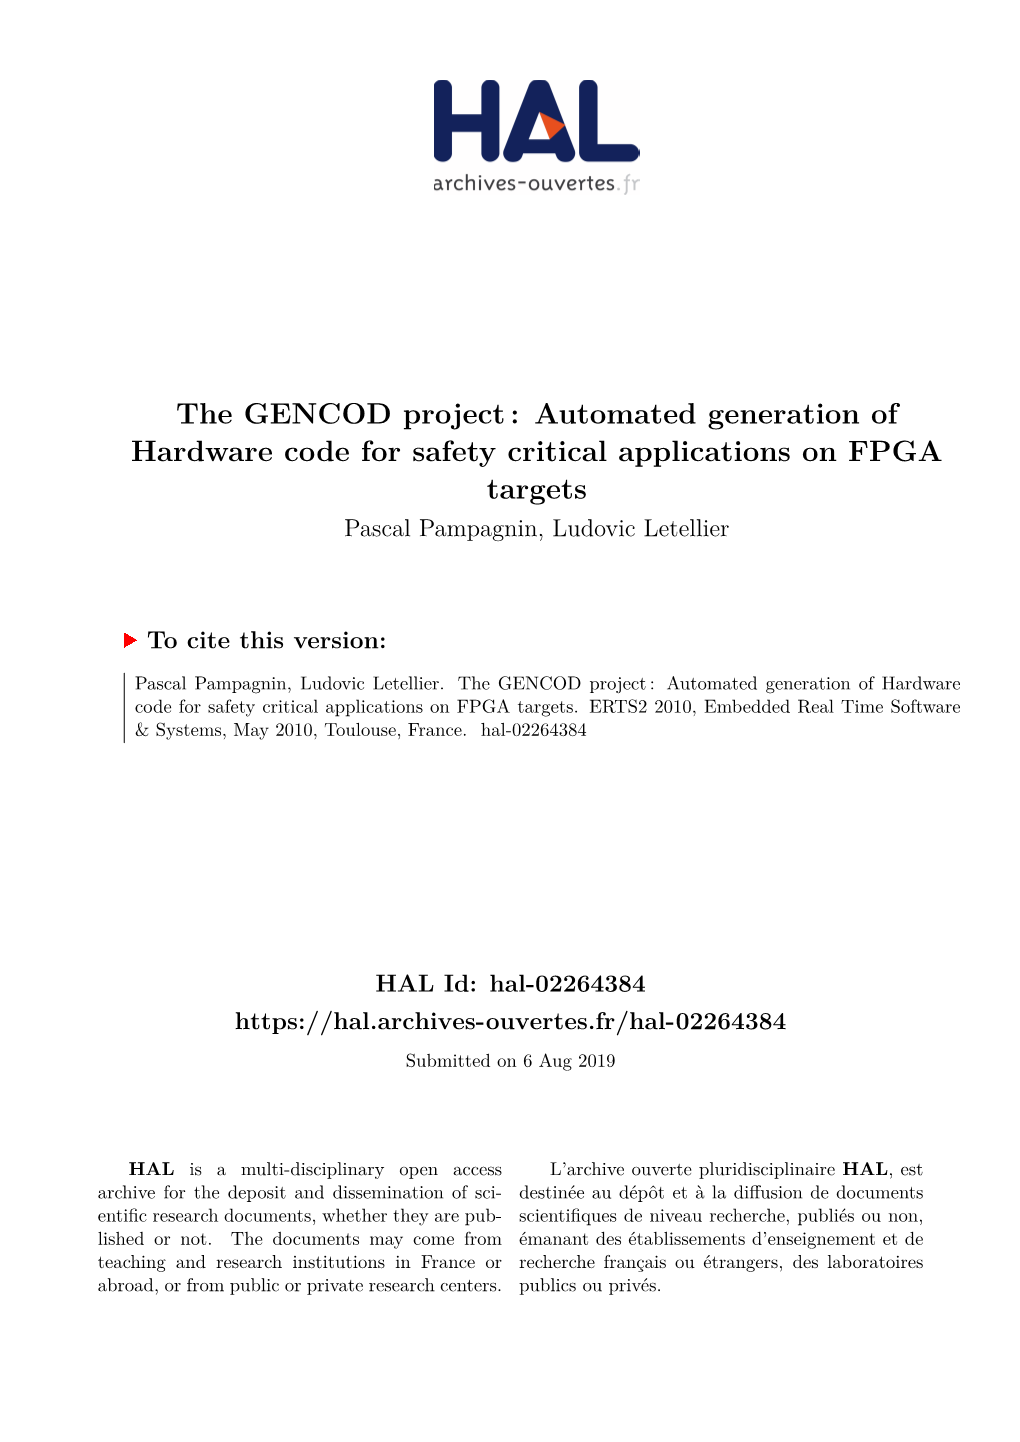 The GENCOD Project: Automated Generation of Hardware Code For